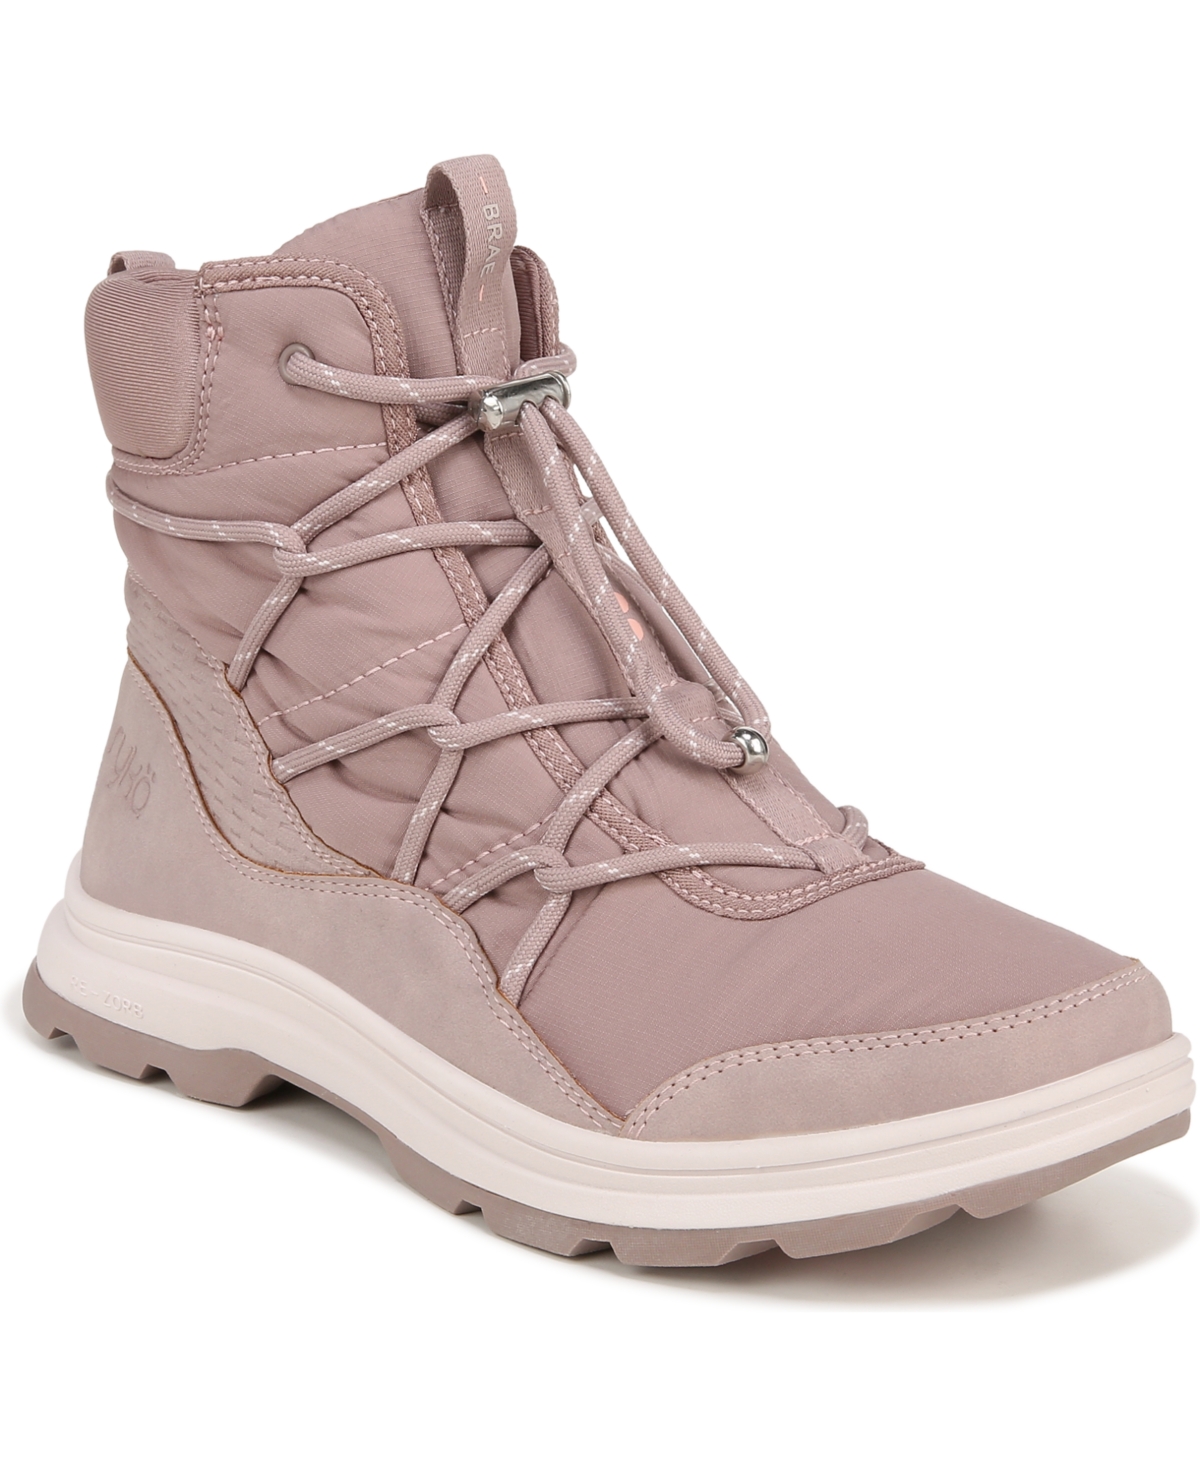 Women's Brae Cold Weather Boots - Mauve Taupe Fabric